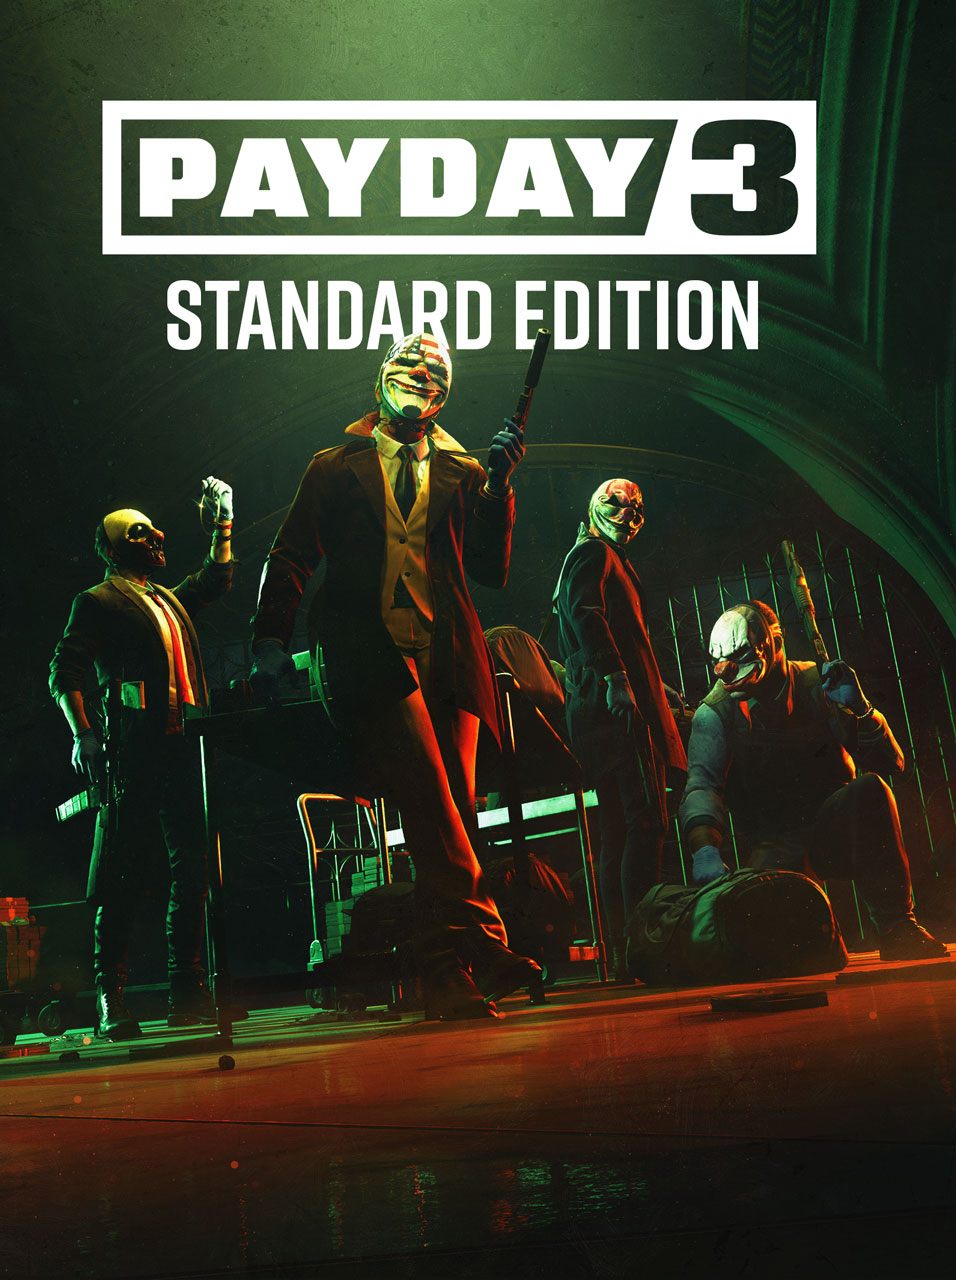 PAYDAY 3 - Gold Edition, PC Steam Game